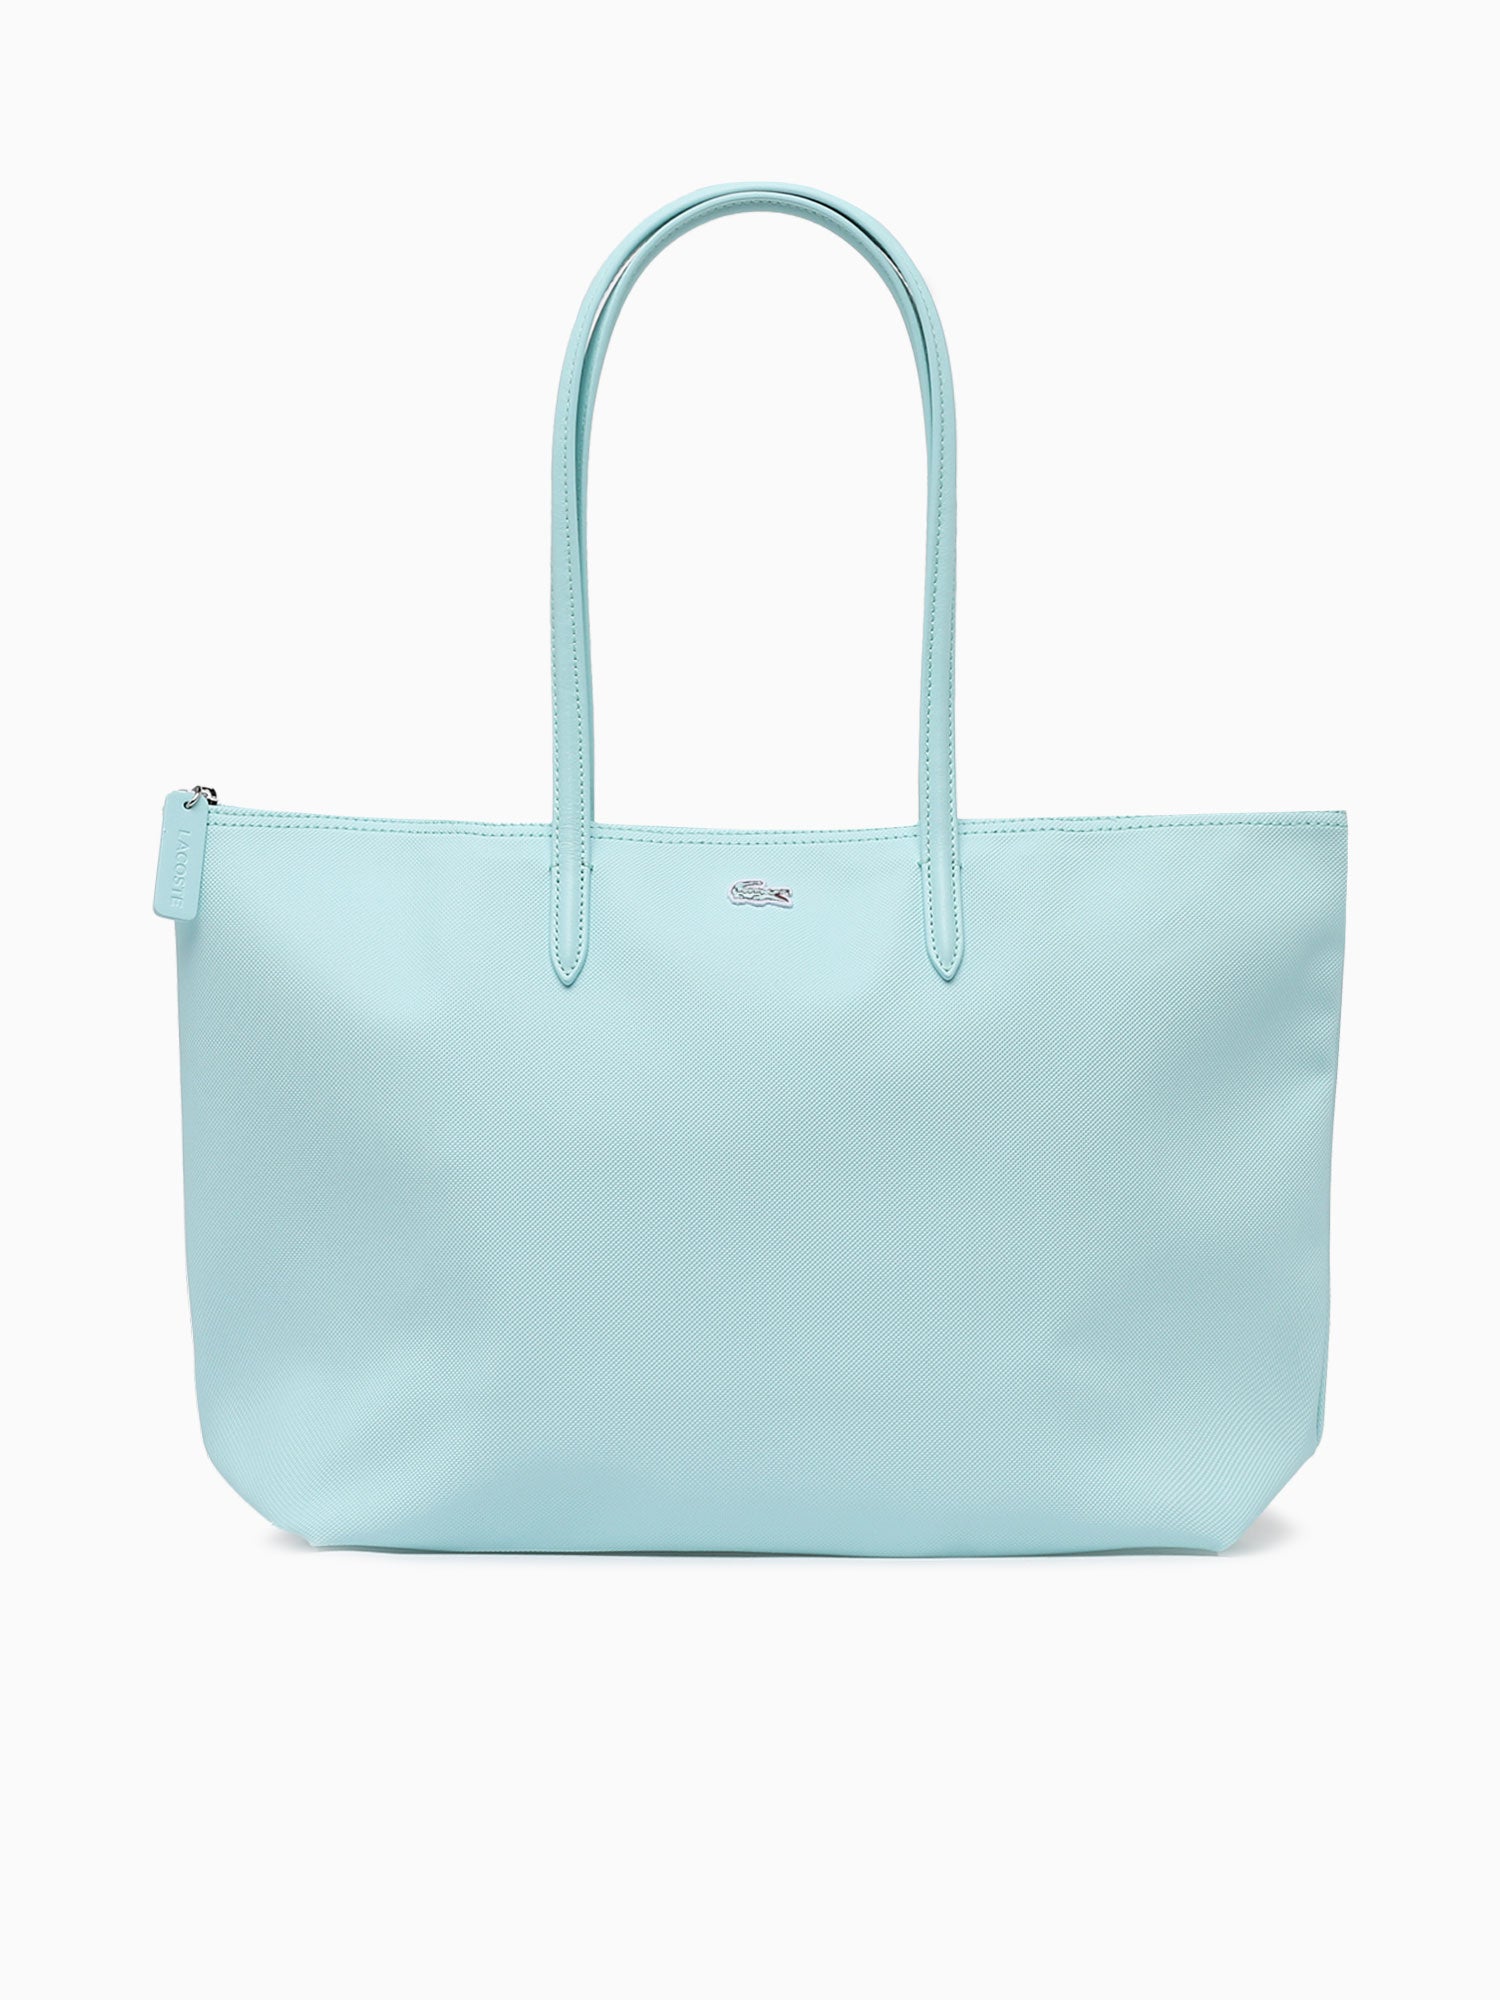 Lacoste Tote Bag The Concept Pastille in Blue